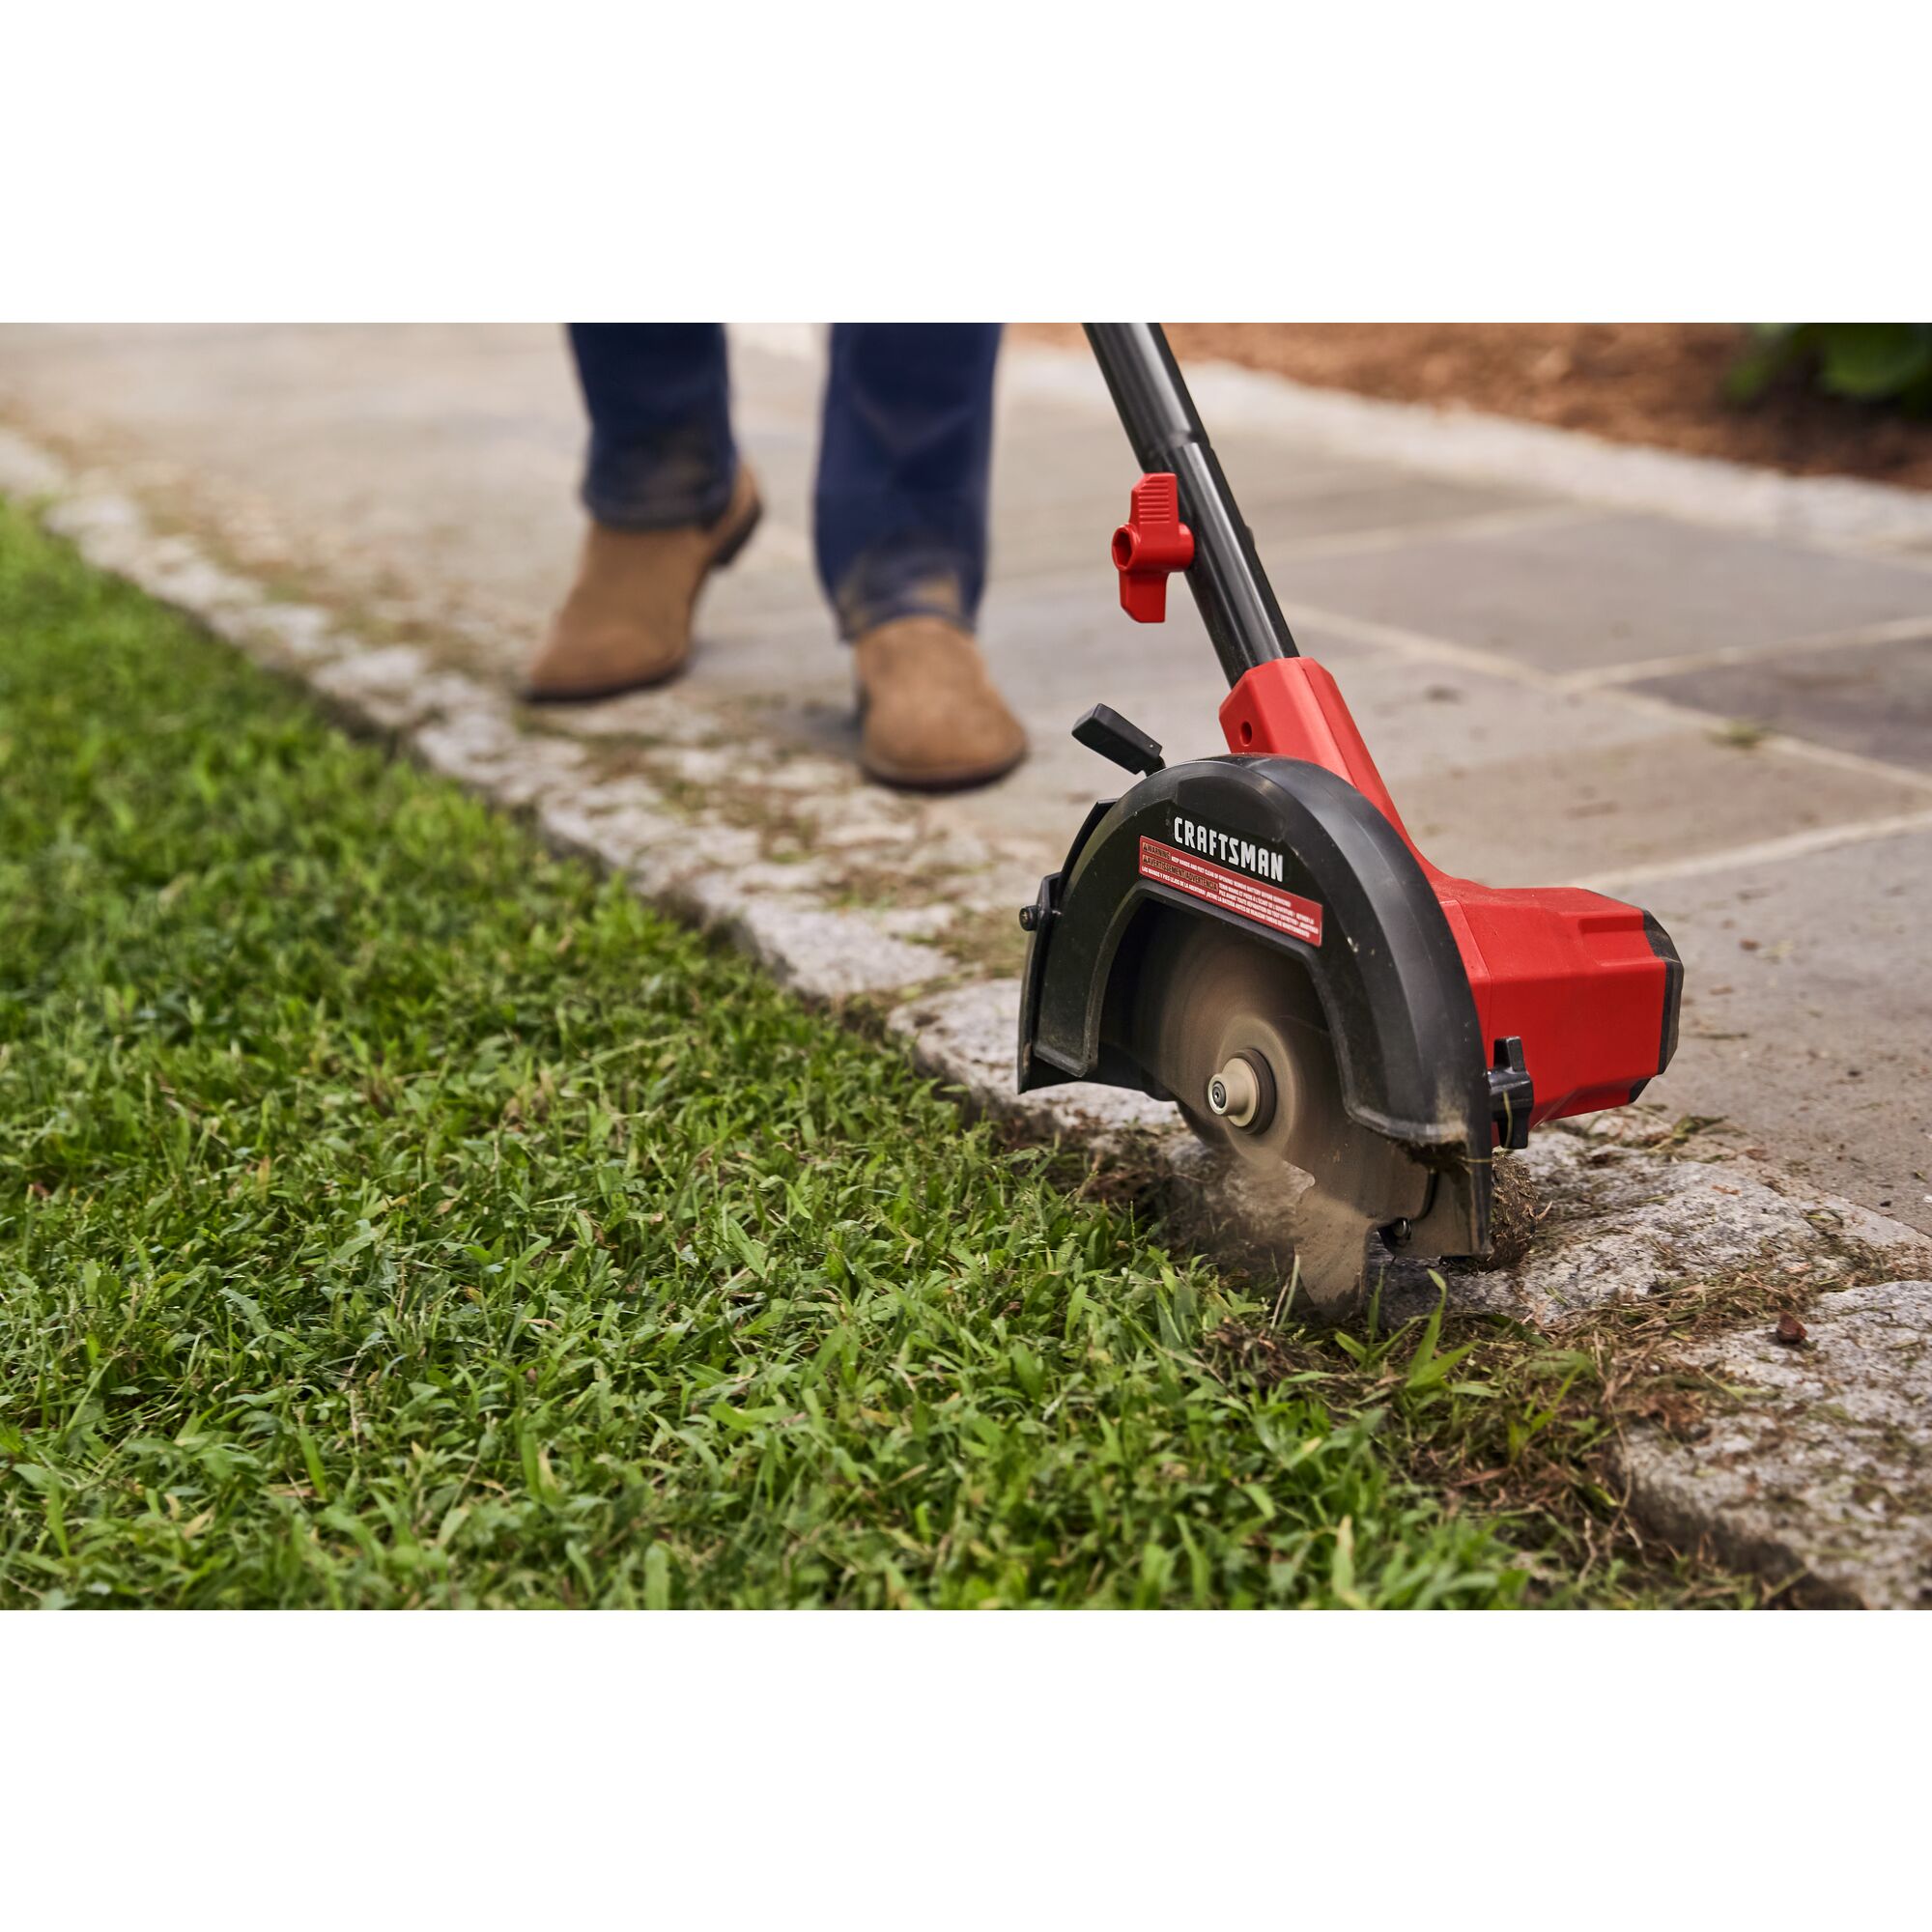 Seamless mobility feature of cordless edger tool only.